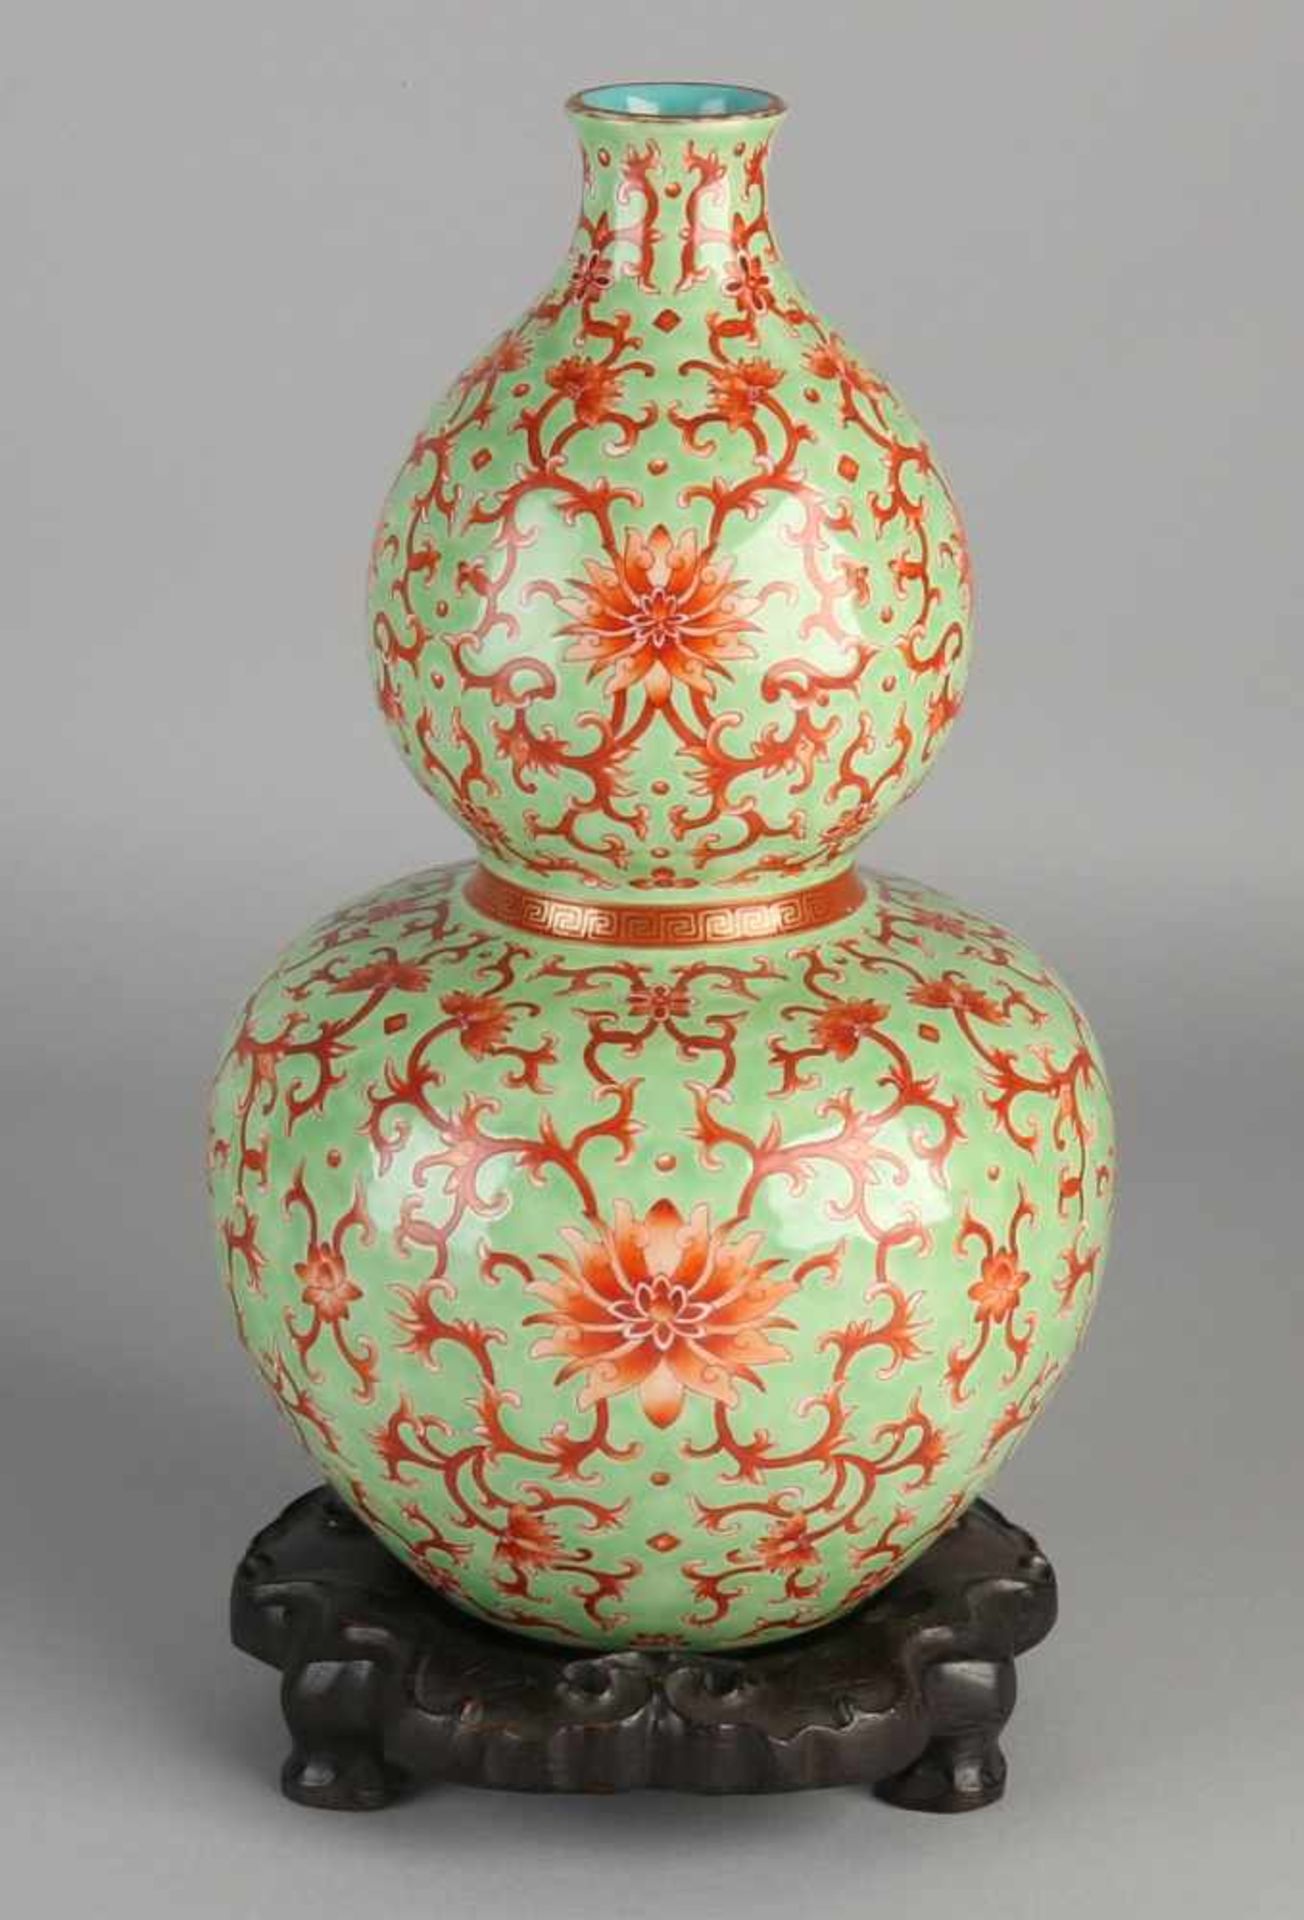 Large Chinese porcelain vase with floral bump / gold decor. Cheng Lung bottom mark. Wood stabbed